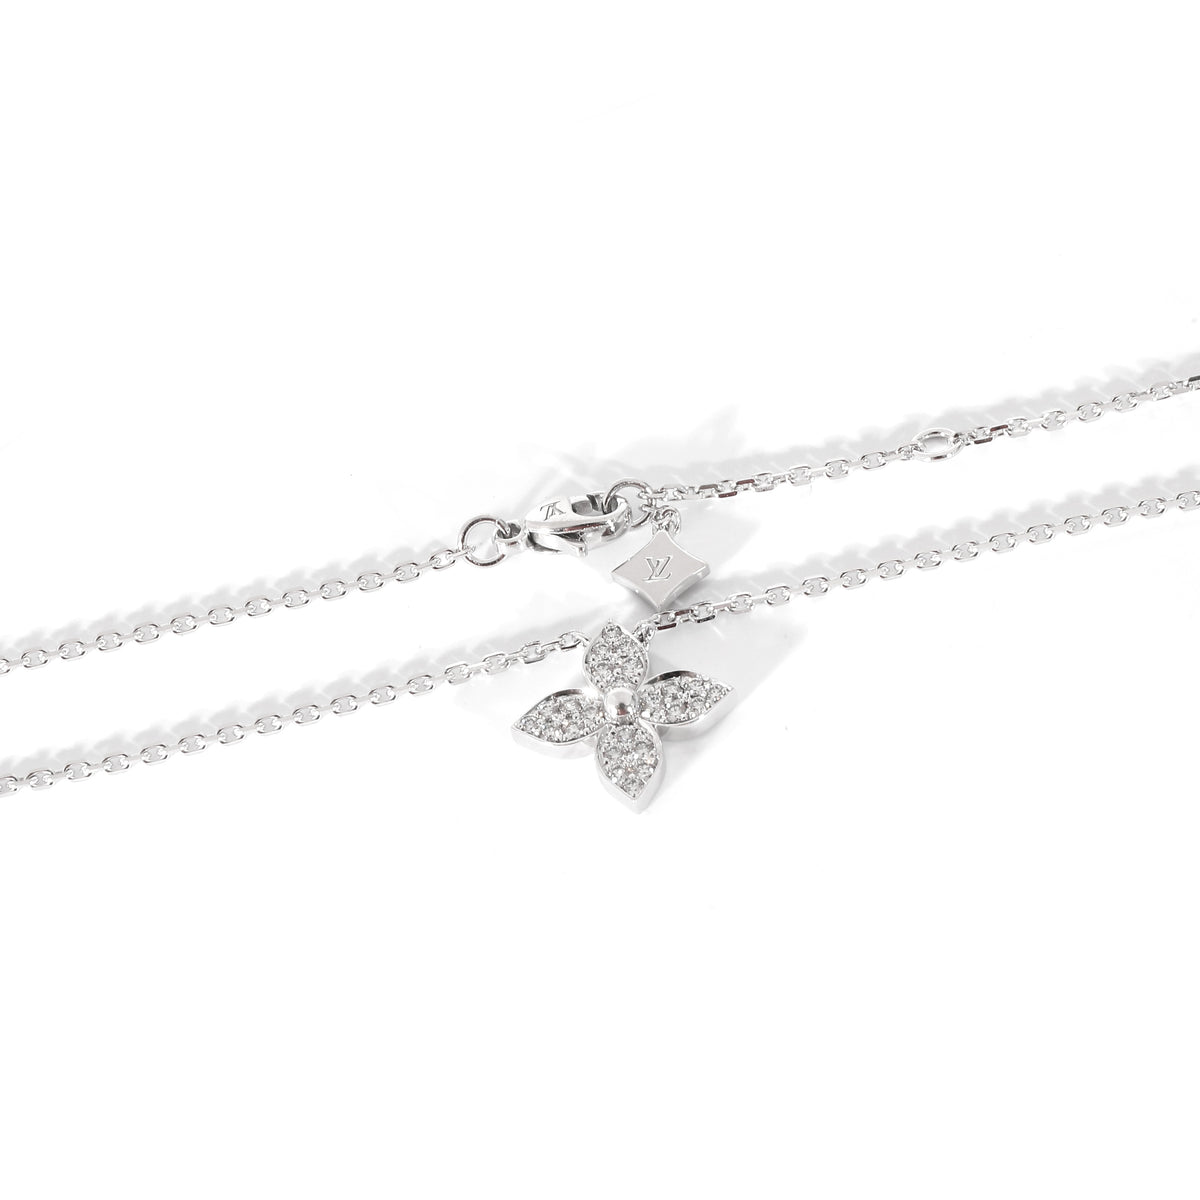 Louis Vuitton Idylle Blossom Necklace in 18K White Gold 0.2 ctw - White Gold / Necklace | Pre-owned & Certified | used Second Hand | Womens